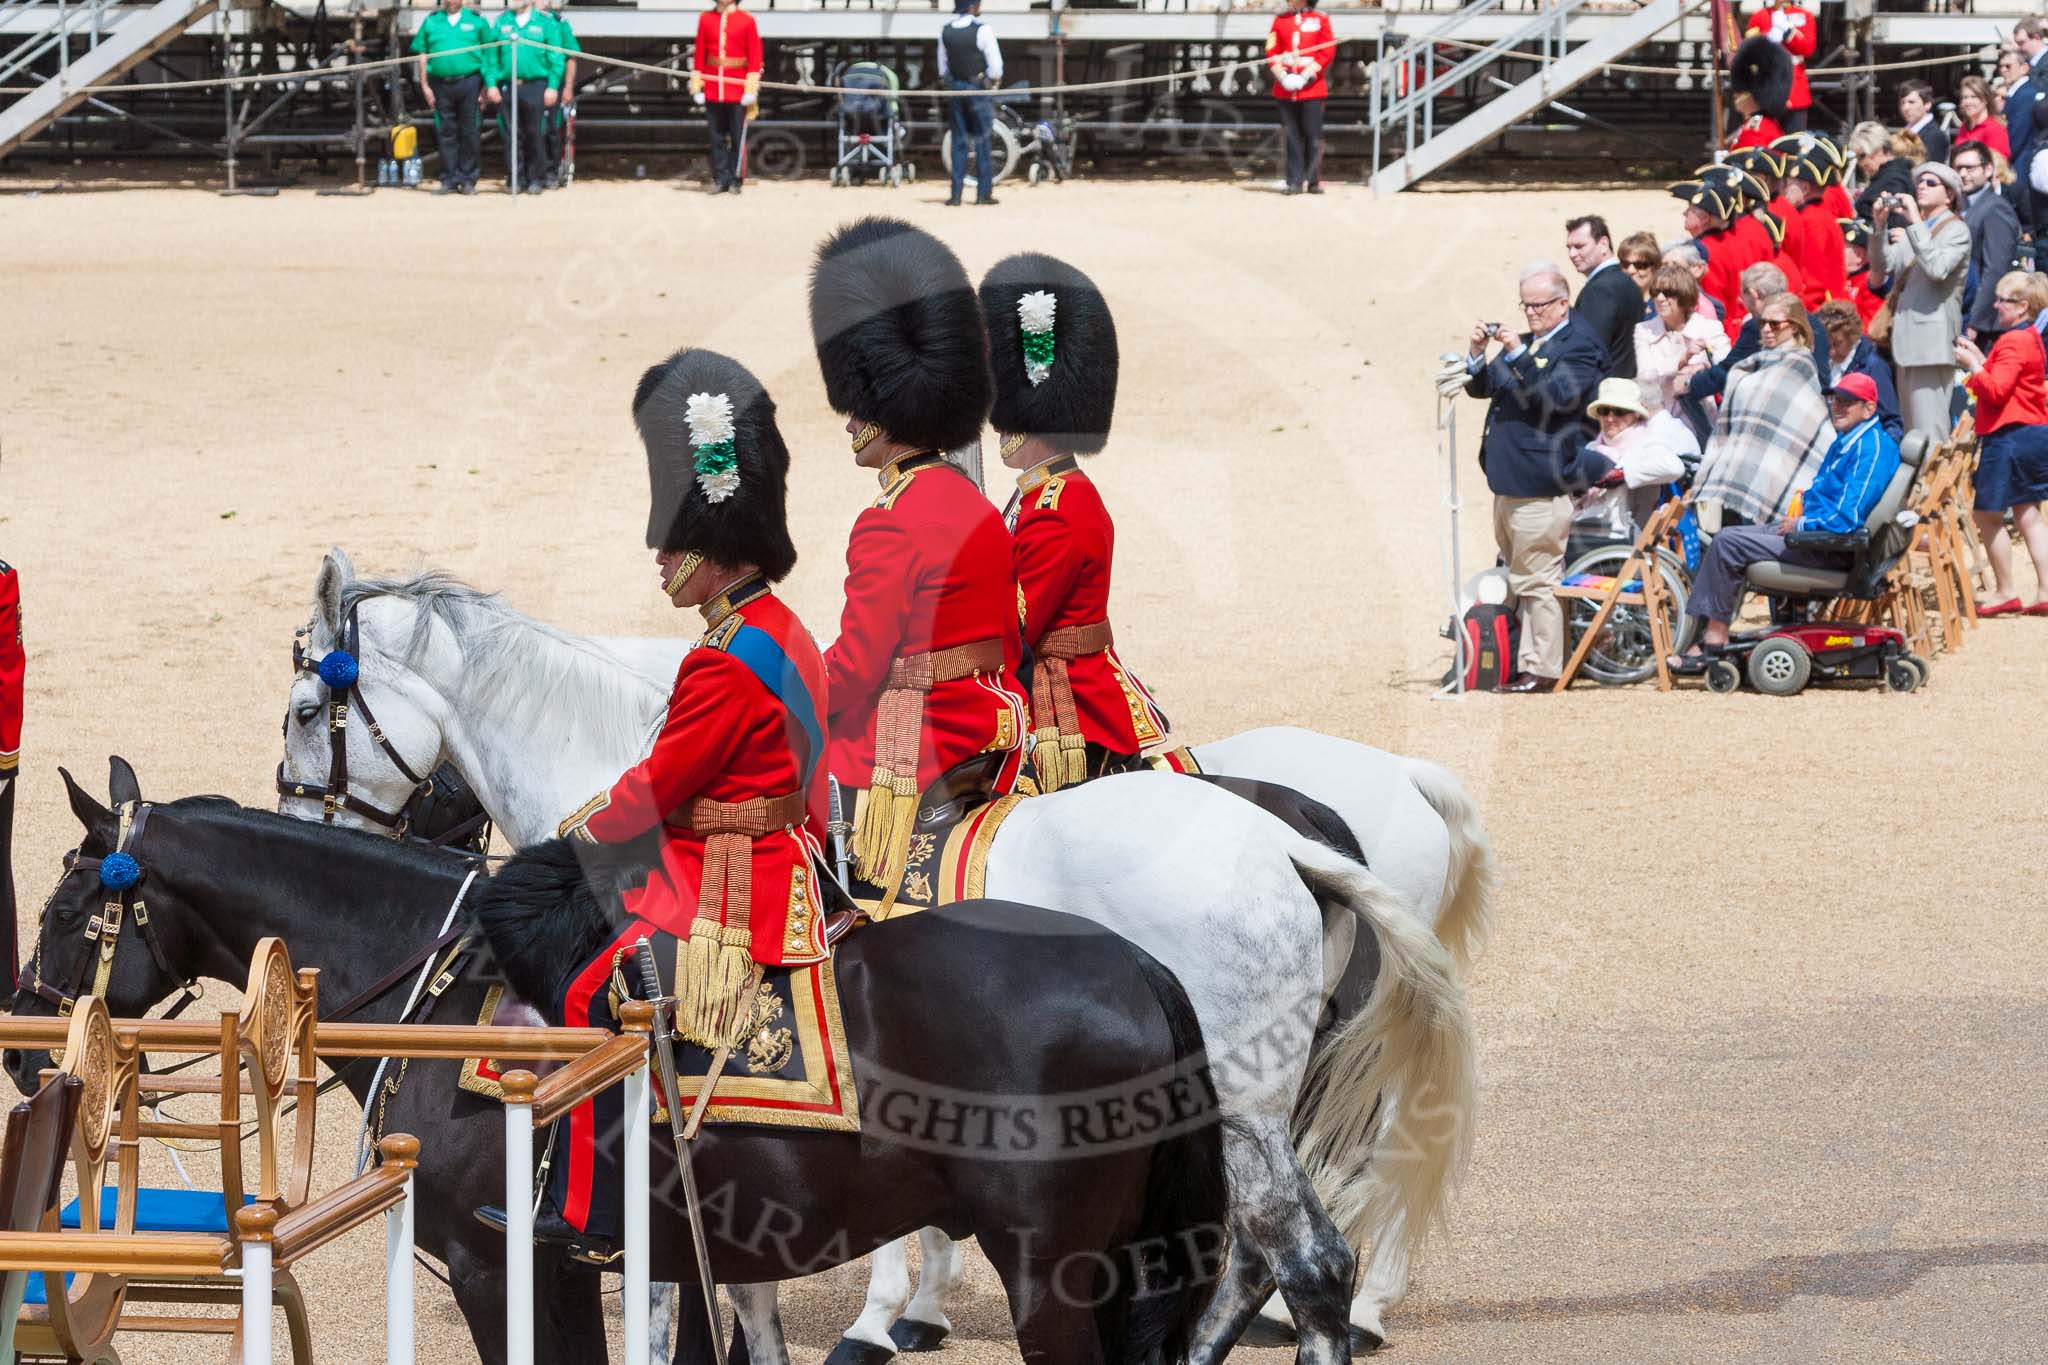 The Colonel's Review 2015.
Horse Guards Parade, Westminster,
London,

United Kingdom,
on 06 June 2015 at 11:35, image #387